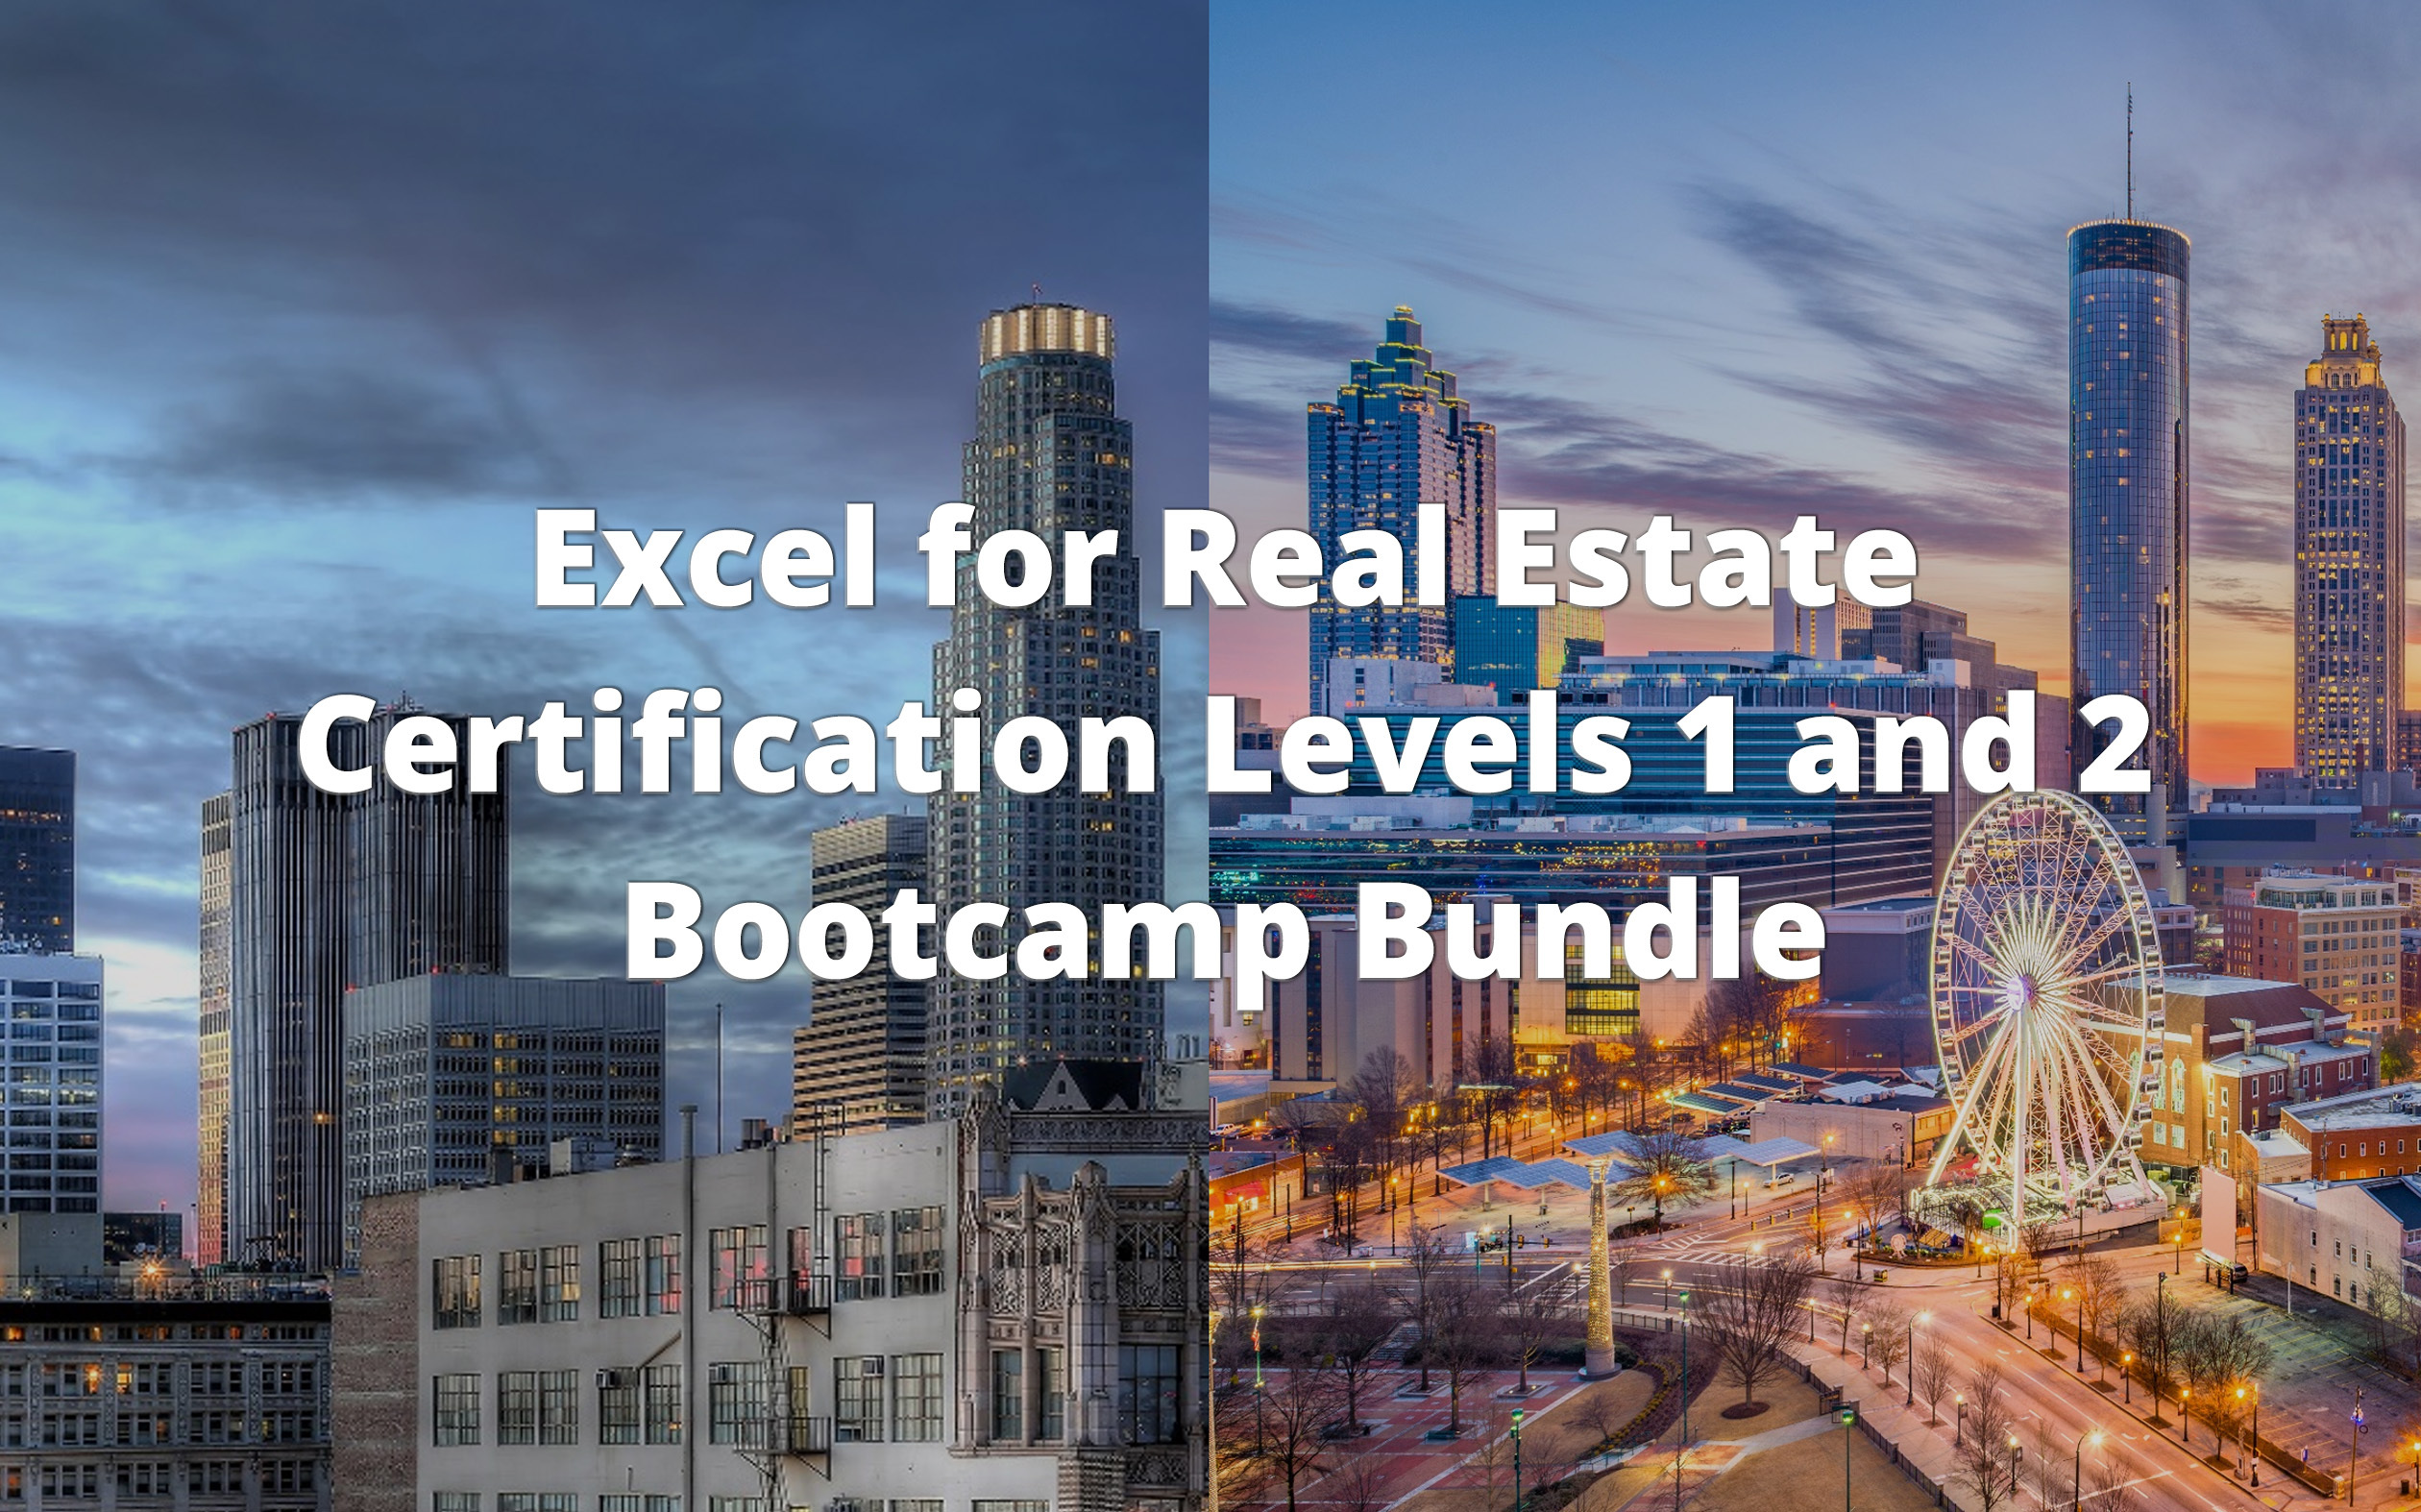 Excel for Real Estate Certification Levels 1 and 2 Bootcamp Bundle